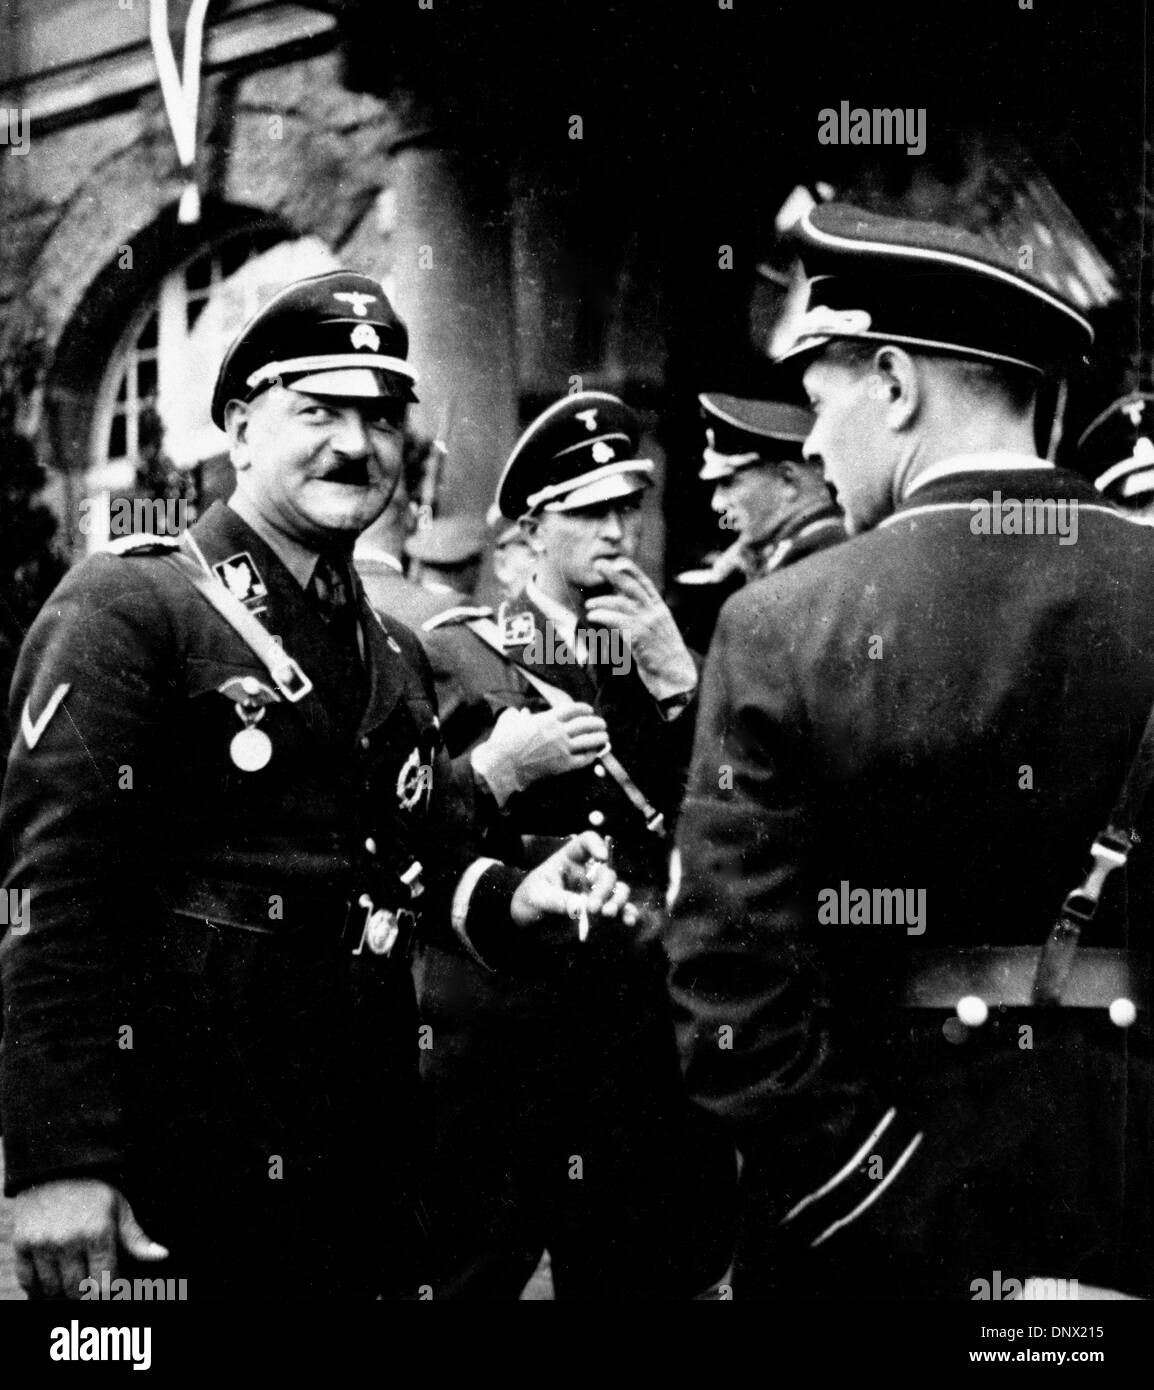 May 1, 1938 - Munich, Germany - SEPP DIETRICH, Josef 'Sepp' Dietrich (1892 -1966), was a decorated Nazi soldier who commanded formations during World War II. (Credit Image: © KEYSTONE Pictures USA/ZUMAPRESS.com) Stock Photo